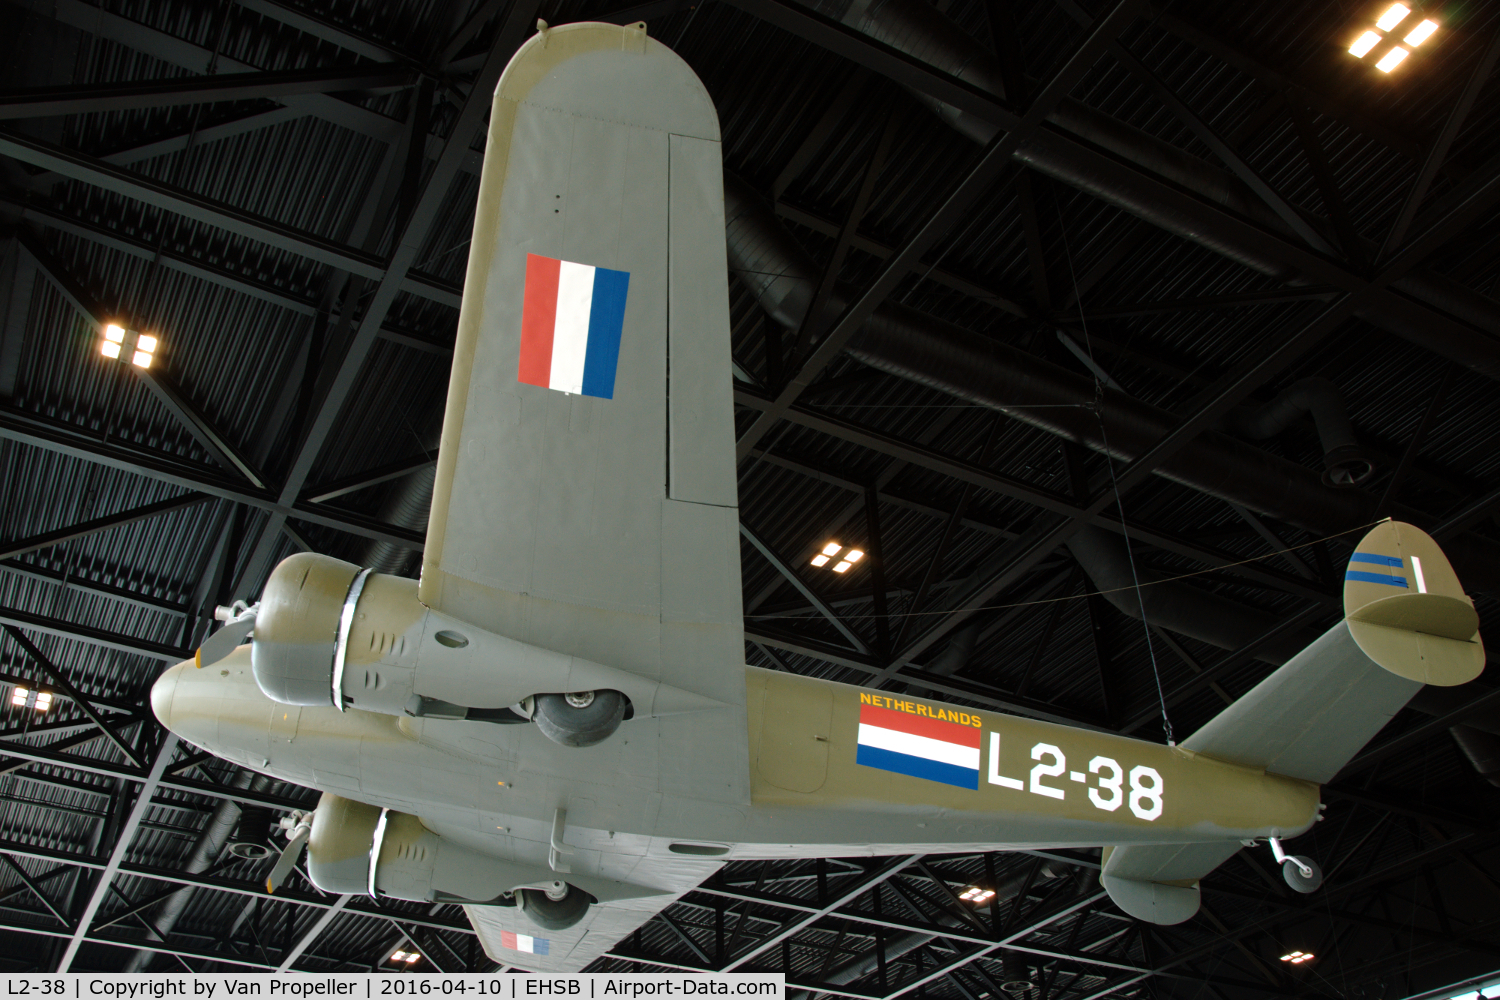 L2-38, 1941 Lockheed 12A Electra Junior C/N 1306, Lockheed 12-26 Electra Junior in ML-KNIL (Dutch East Indies Army Aviation) colours preserved in the National Military Museum at Soesterberg, the Netherlands